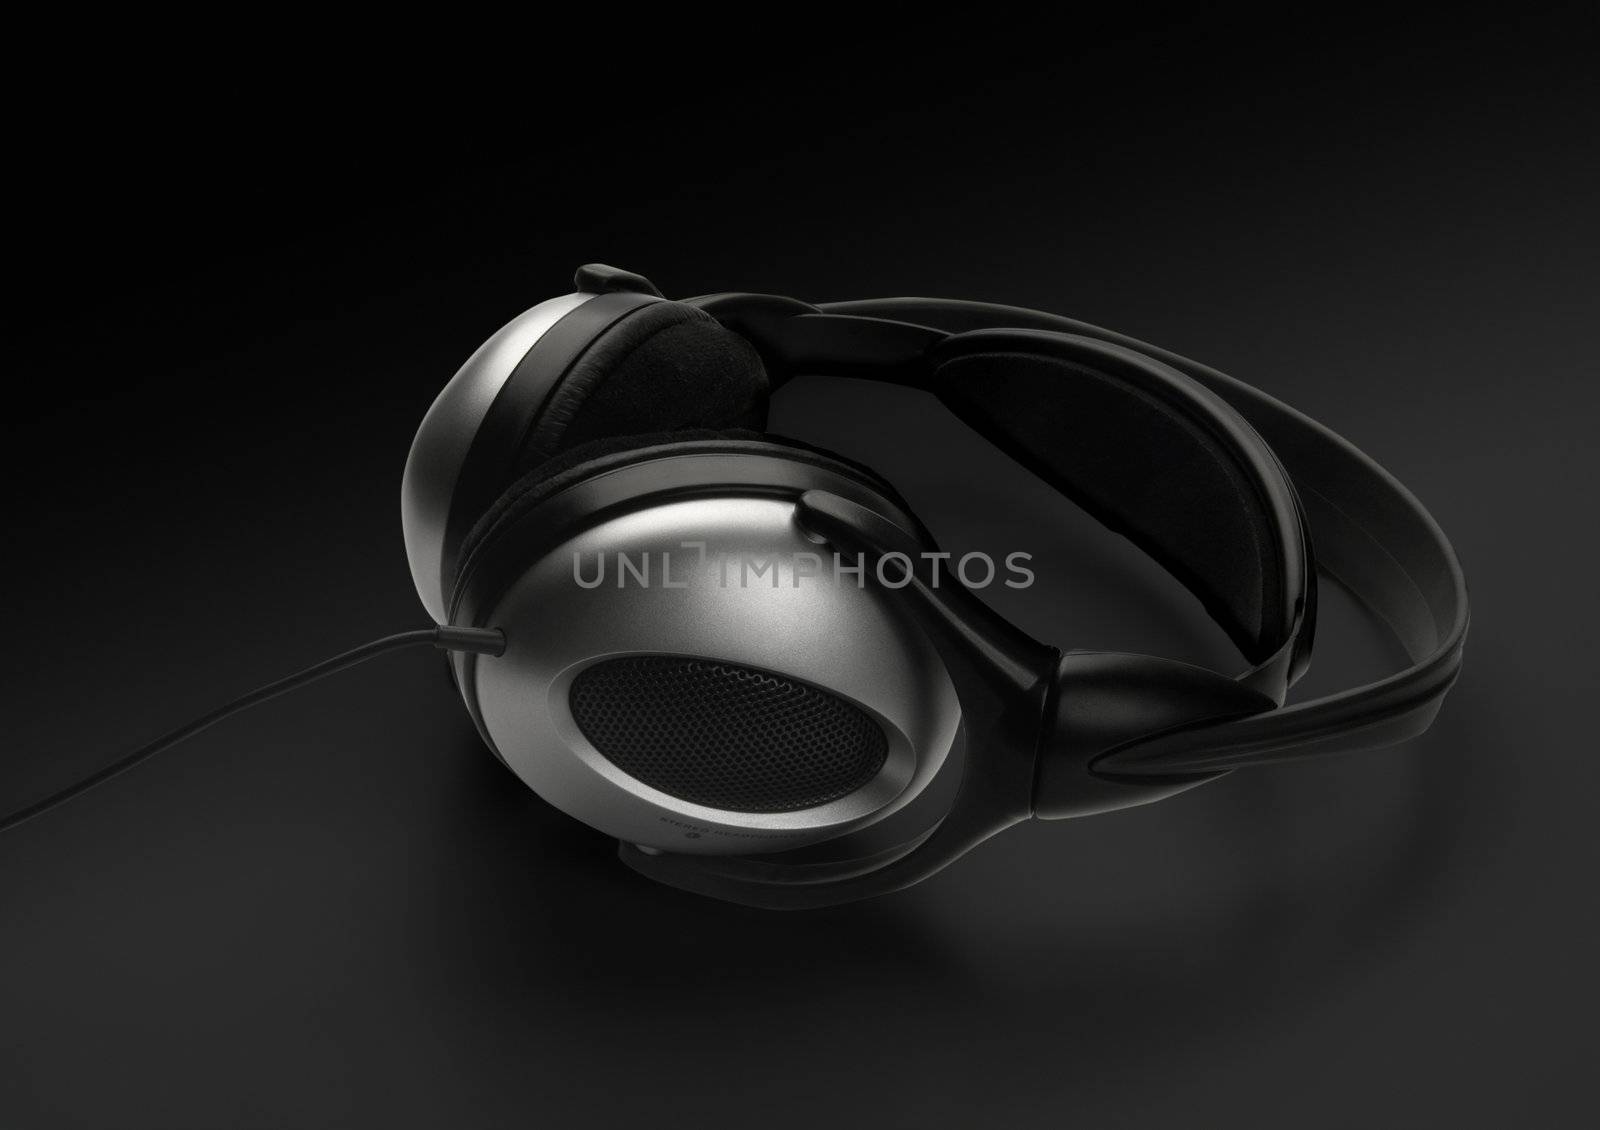 Headphones, isolated on black background. by zeffss